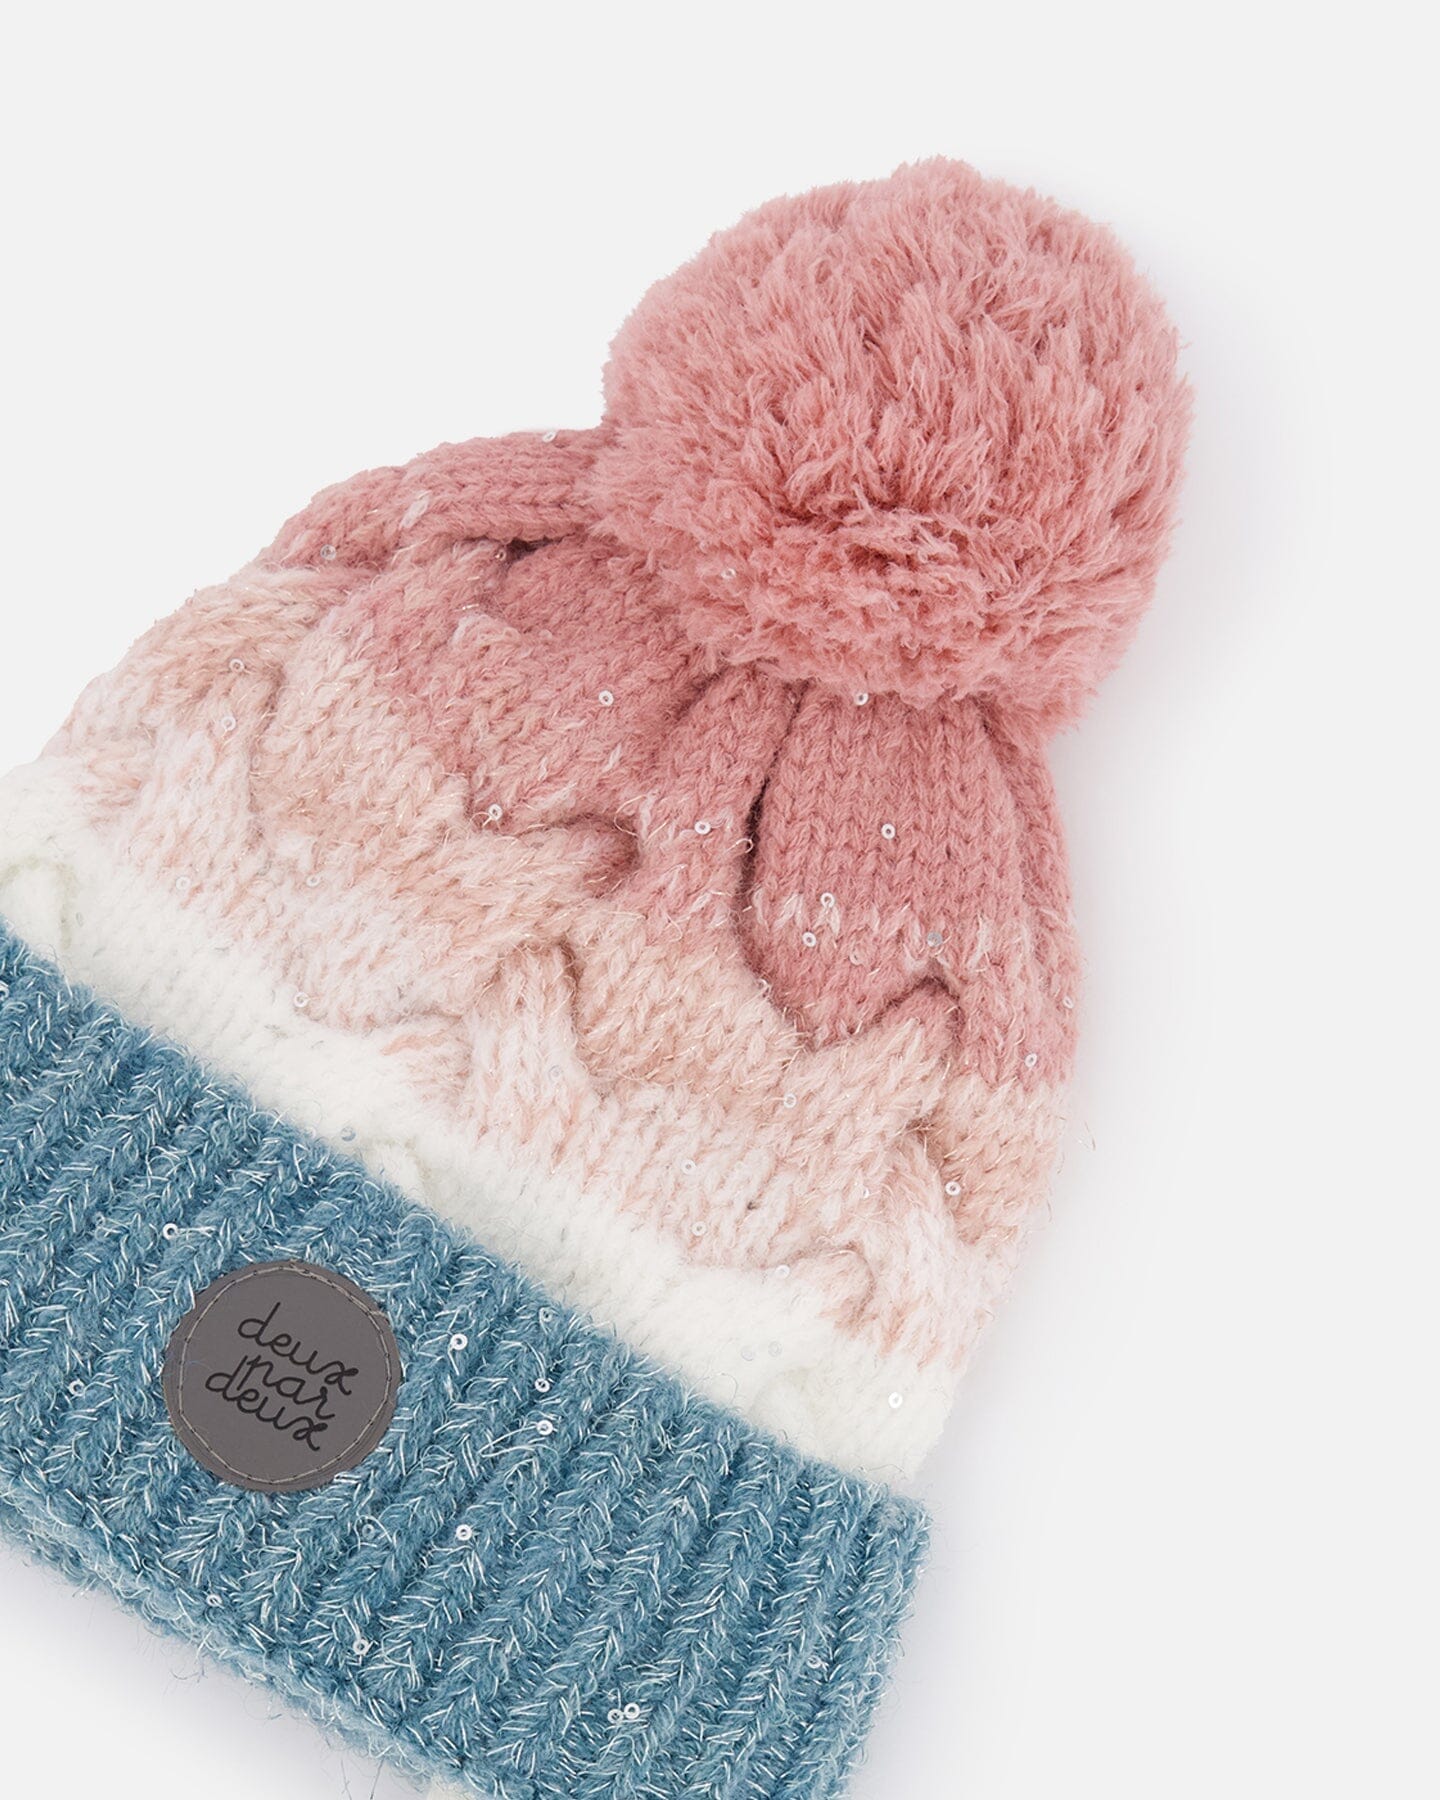 Pompom Knit Earflap Hat Pink And Blue Gradient - F10ZH02_000